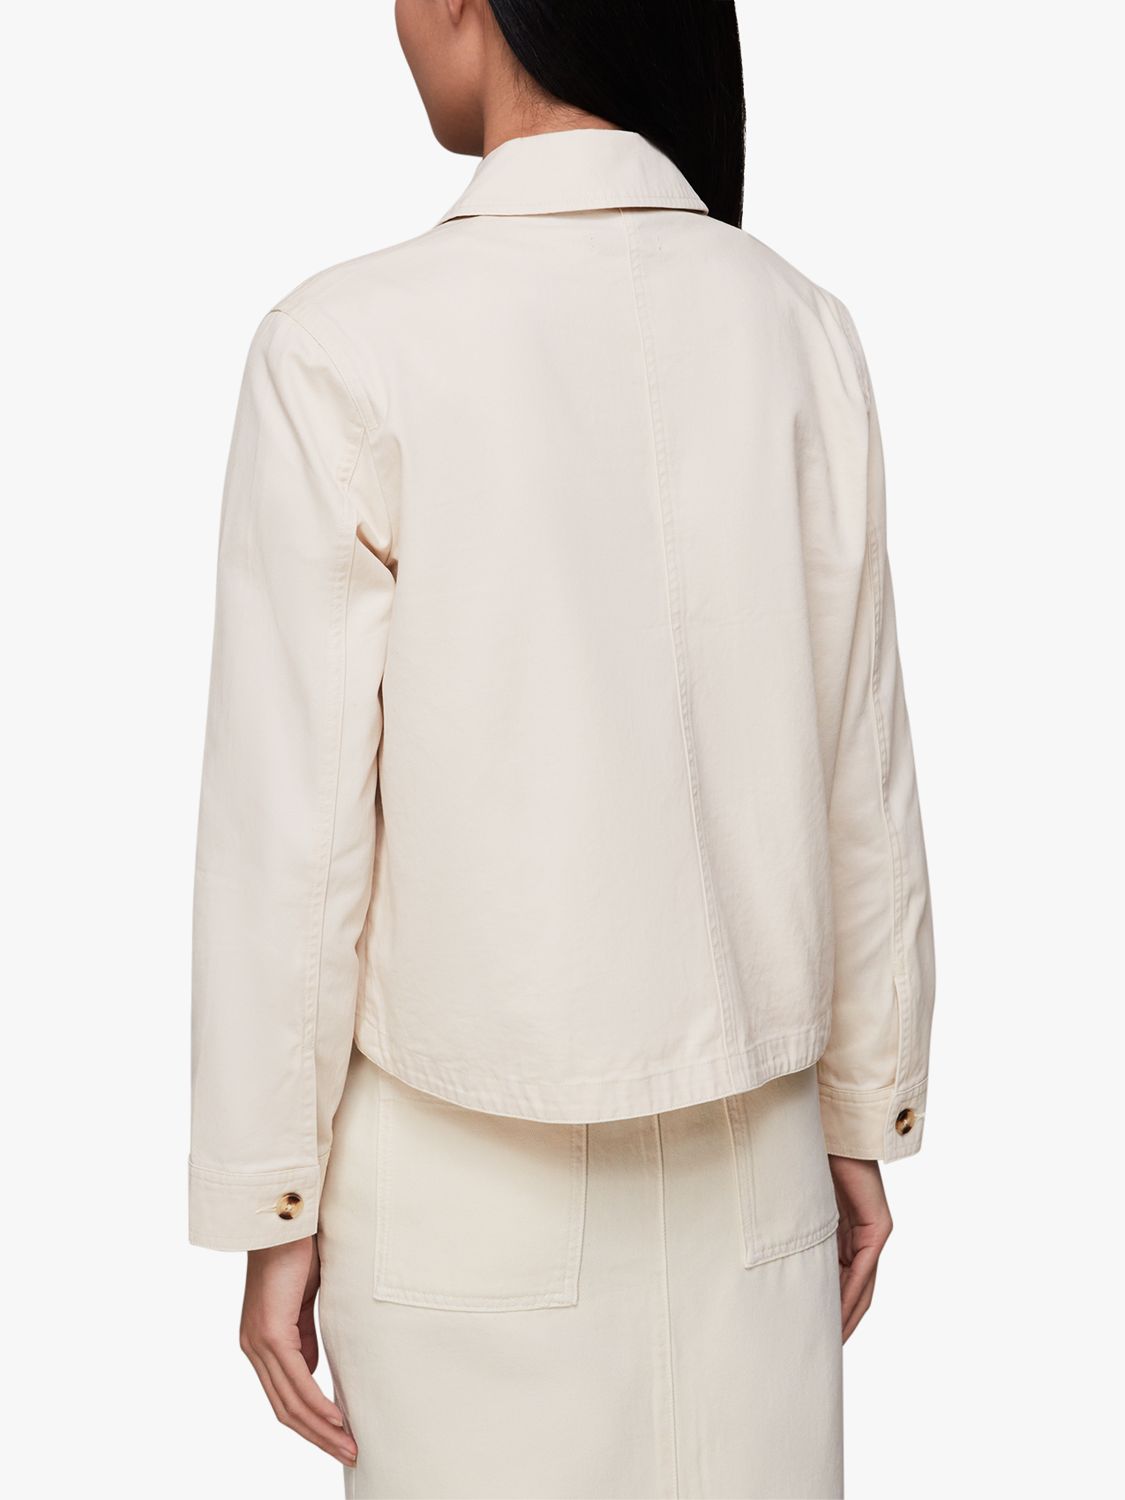 Whistles Marie Casual Cotton Jacket, Stone at John Lewis & Partners